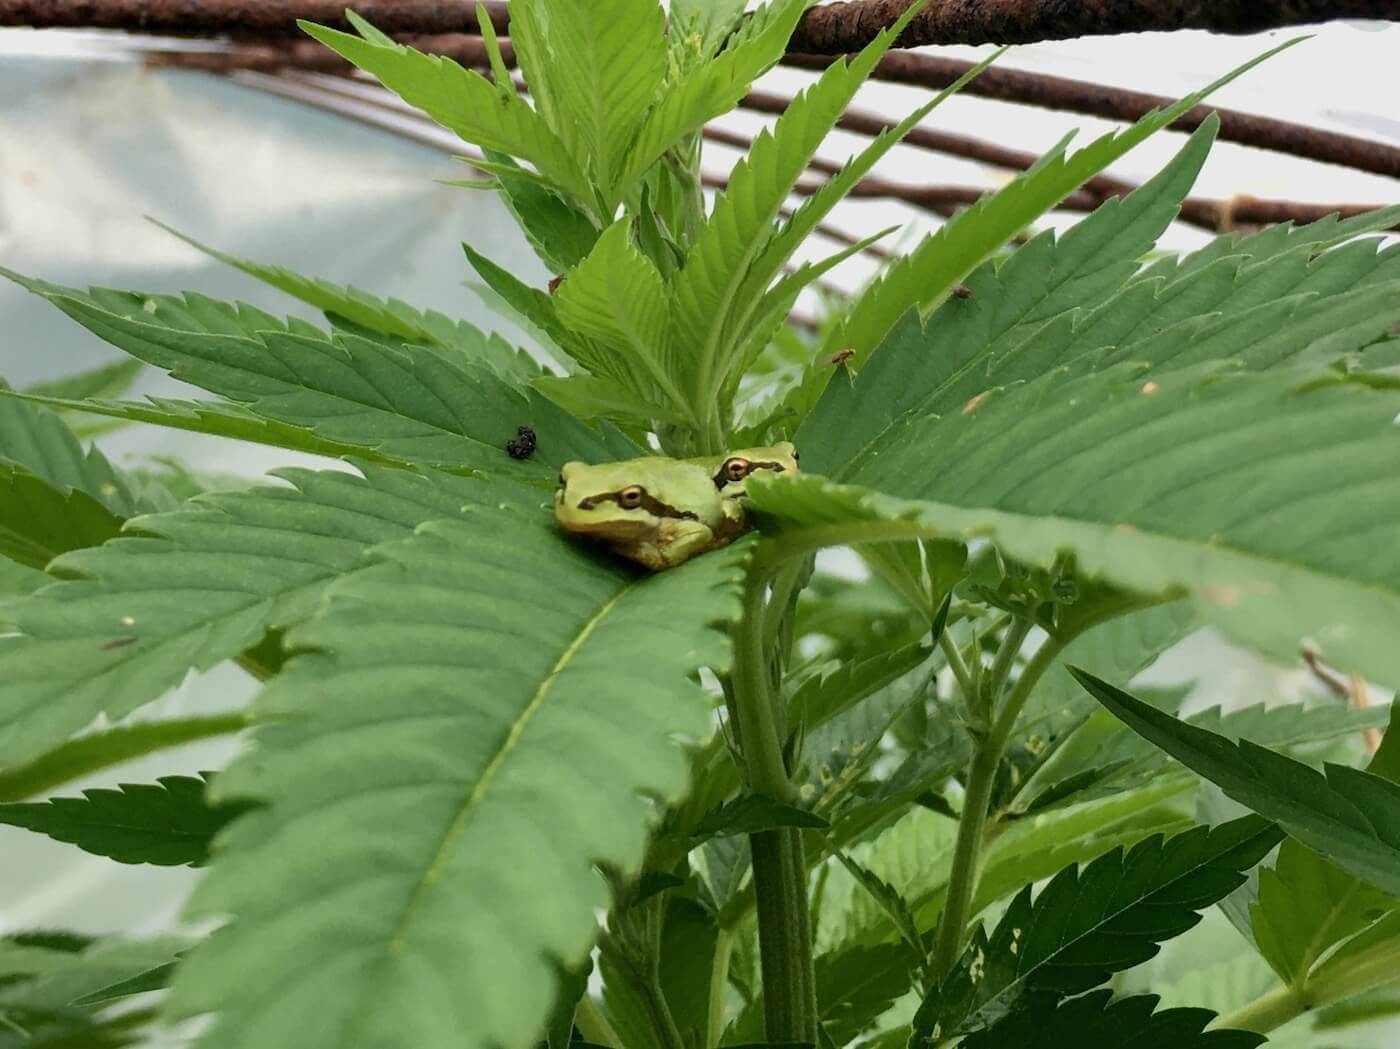 Treefrogs in the cannabis plant